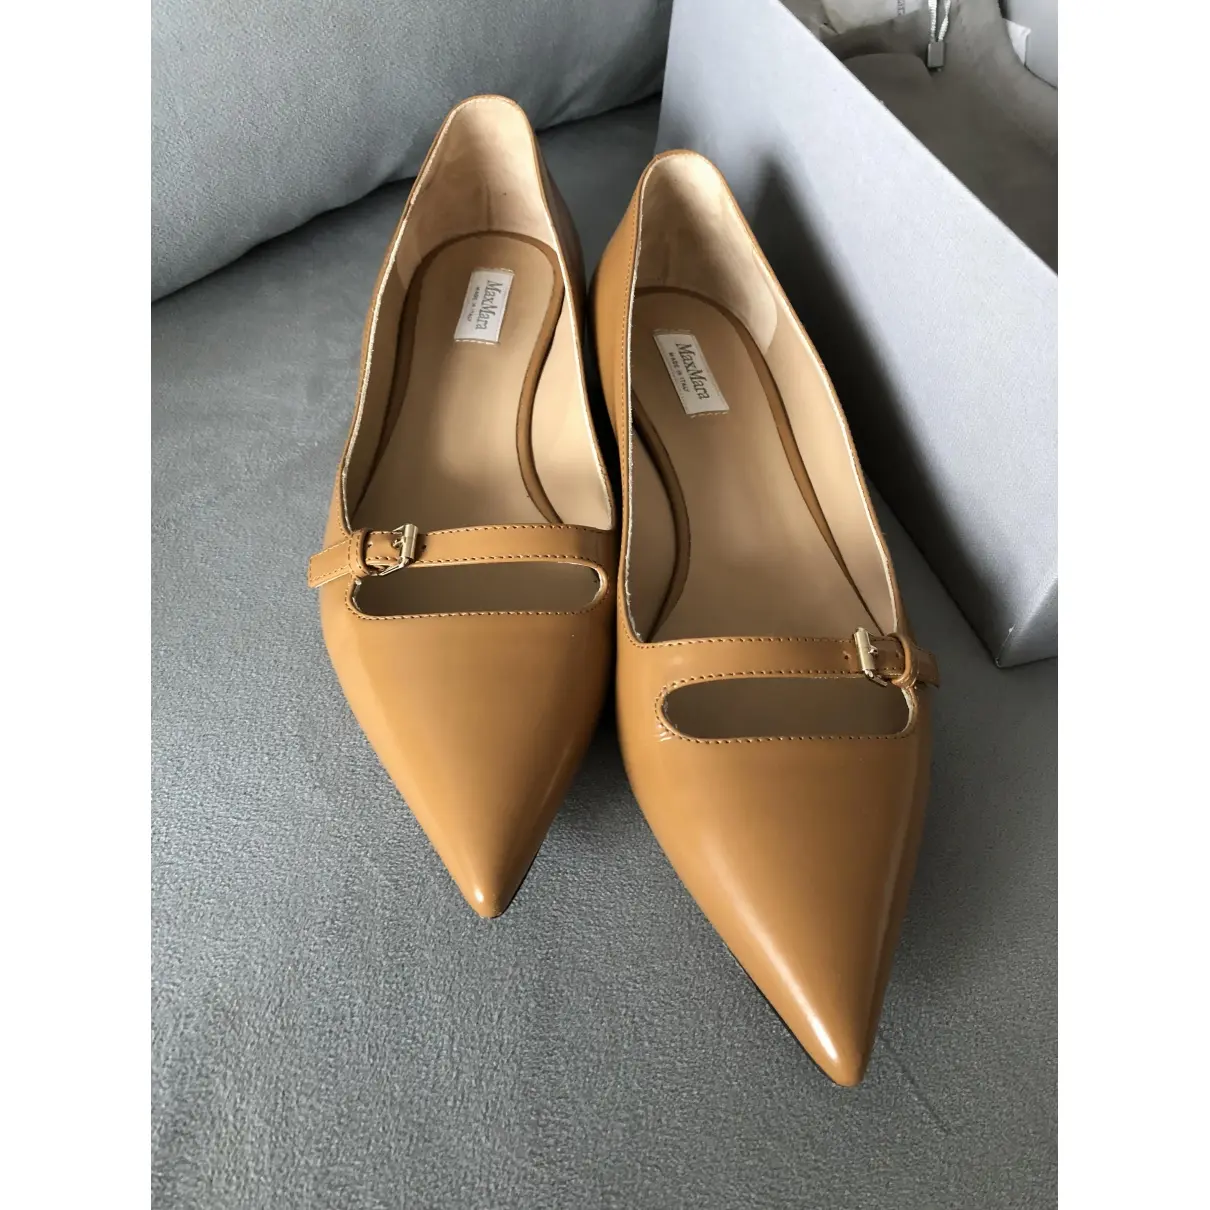 Max Mara Leather ballet flats for sale